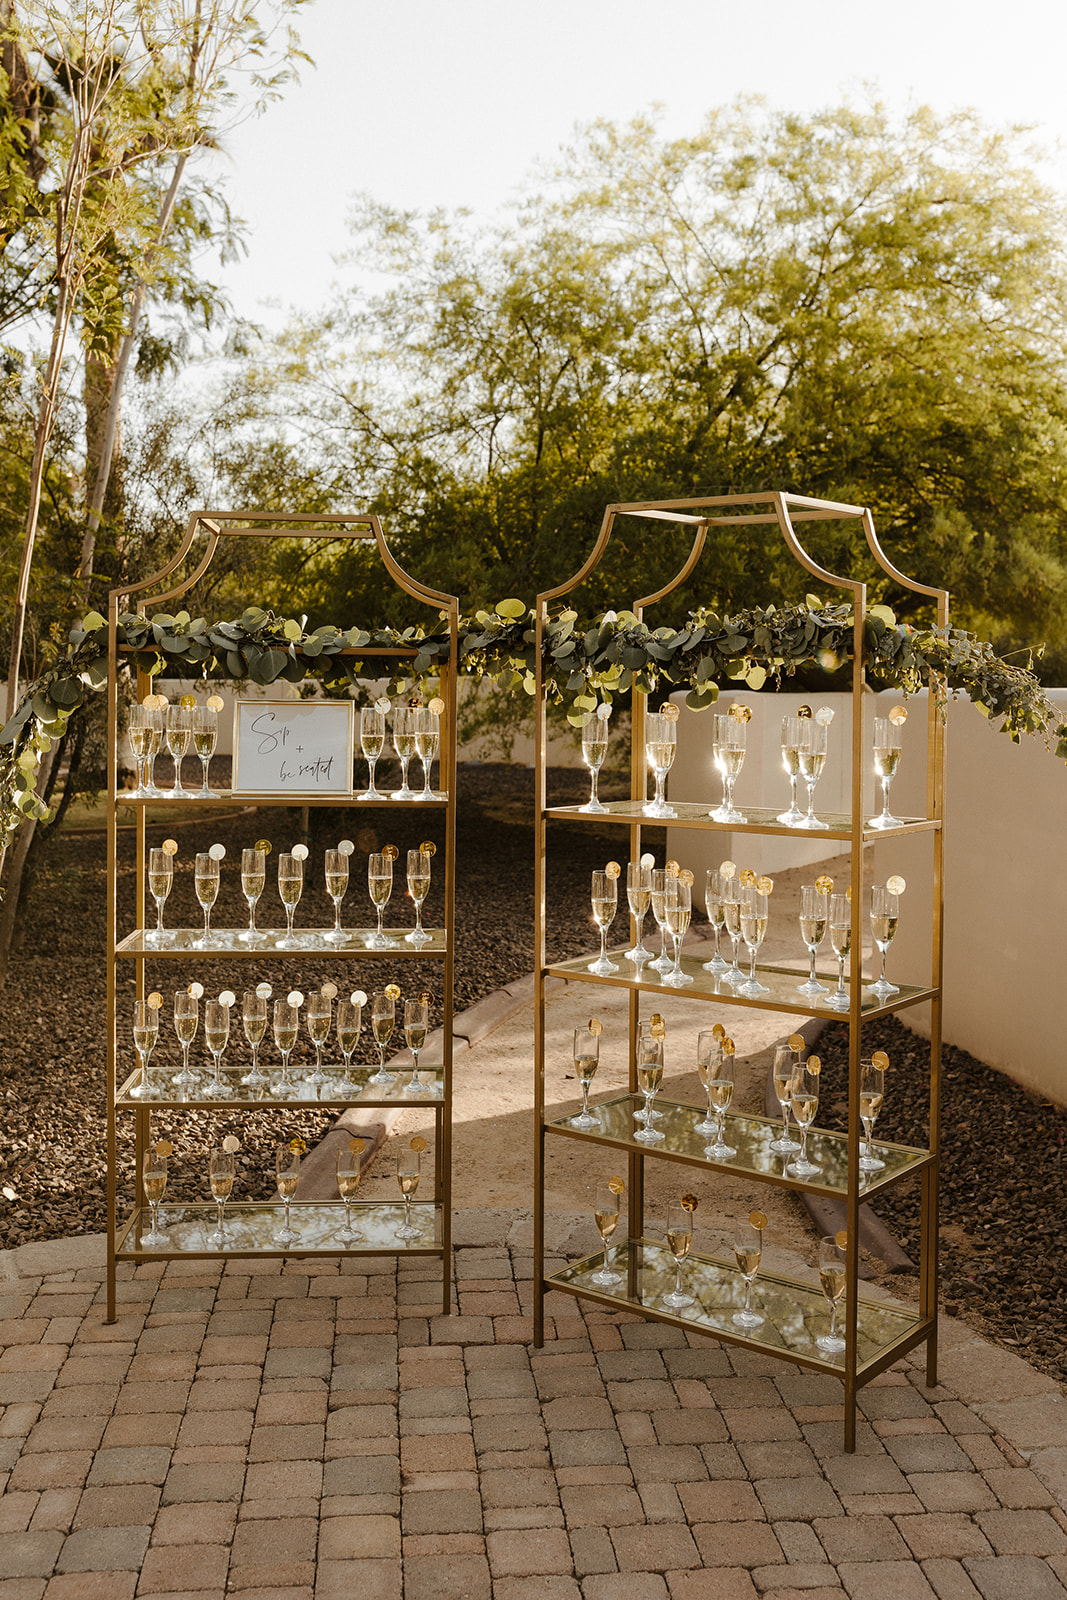 The secret garden event center all set up and ready for the Arizona wedding day